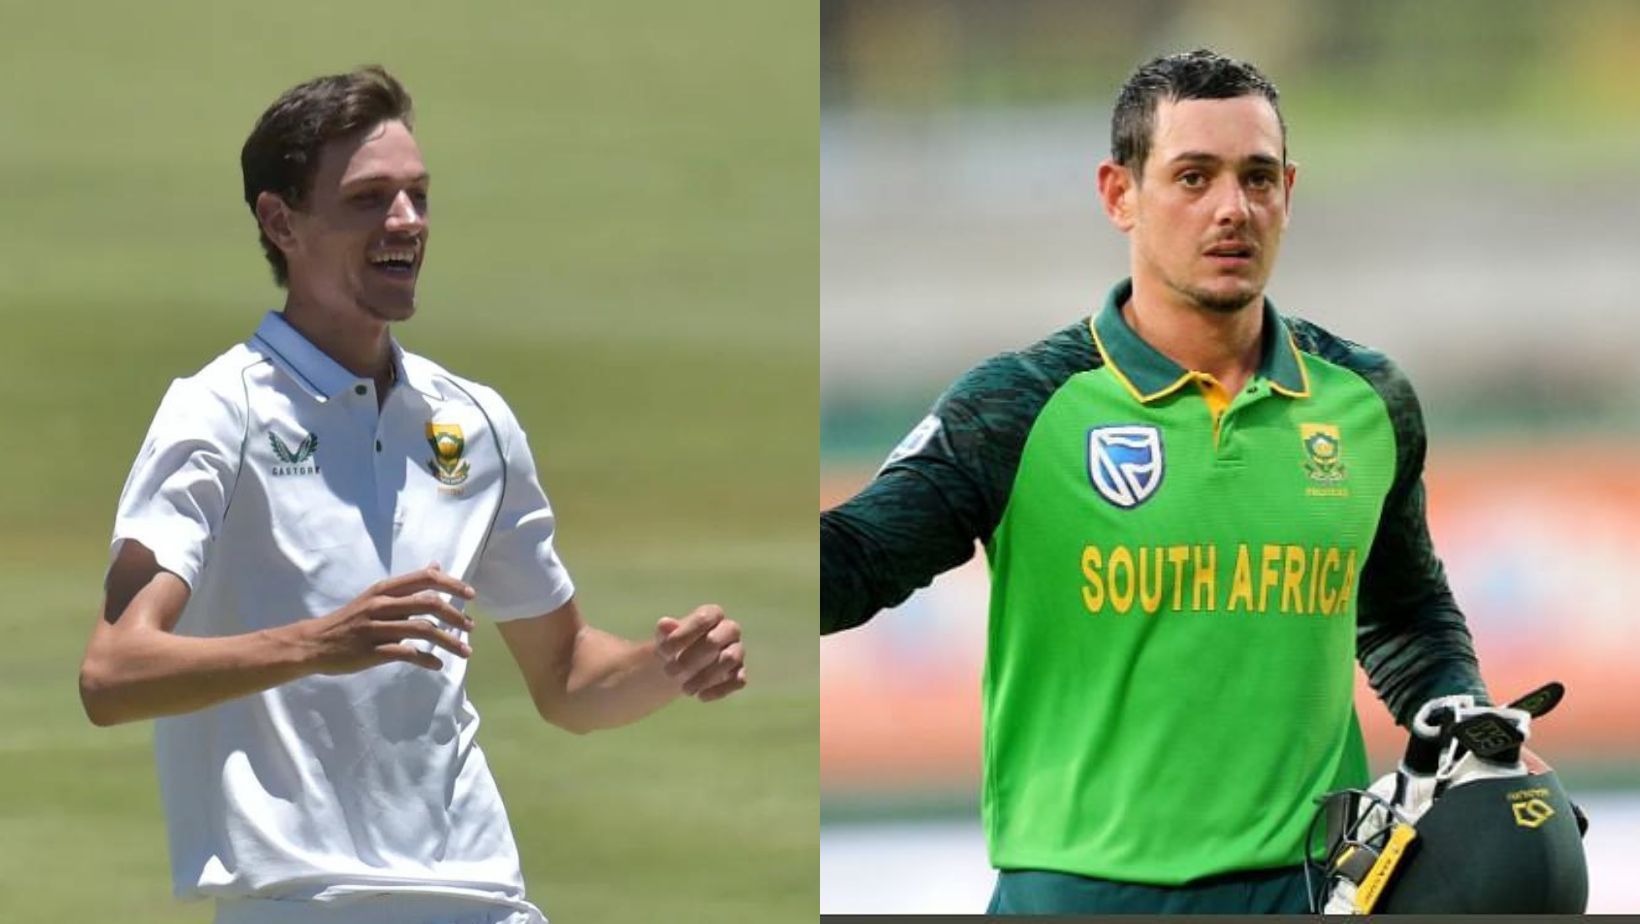 Marco Jansen (L) and Quinton de Kock will be closely watched in the ODI series.